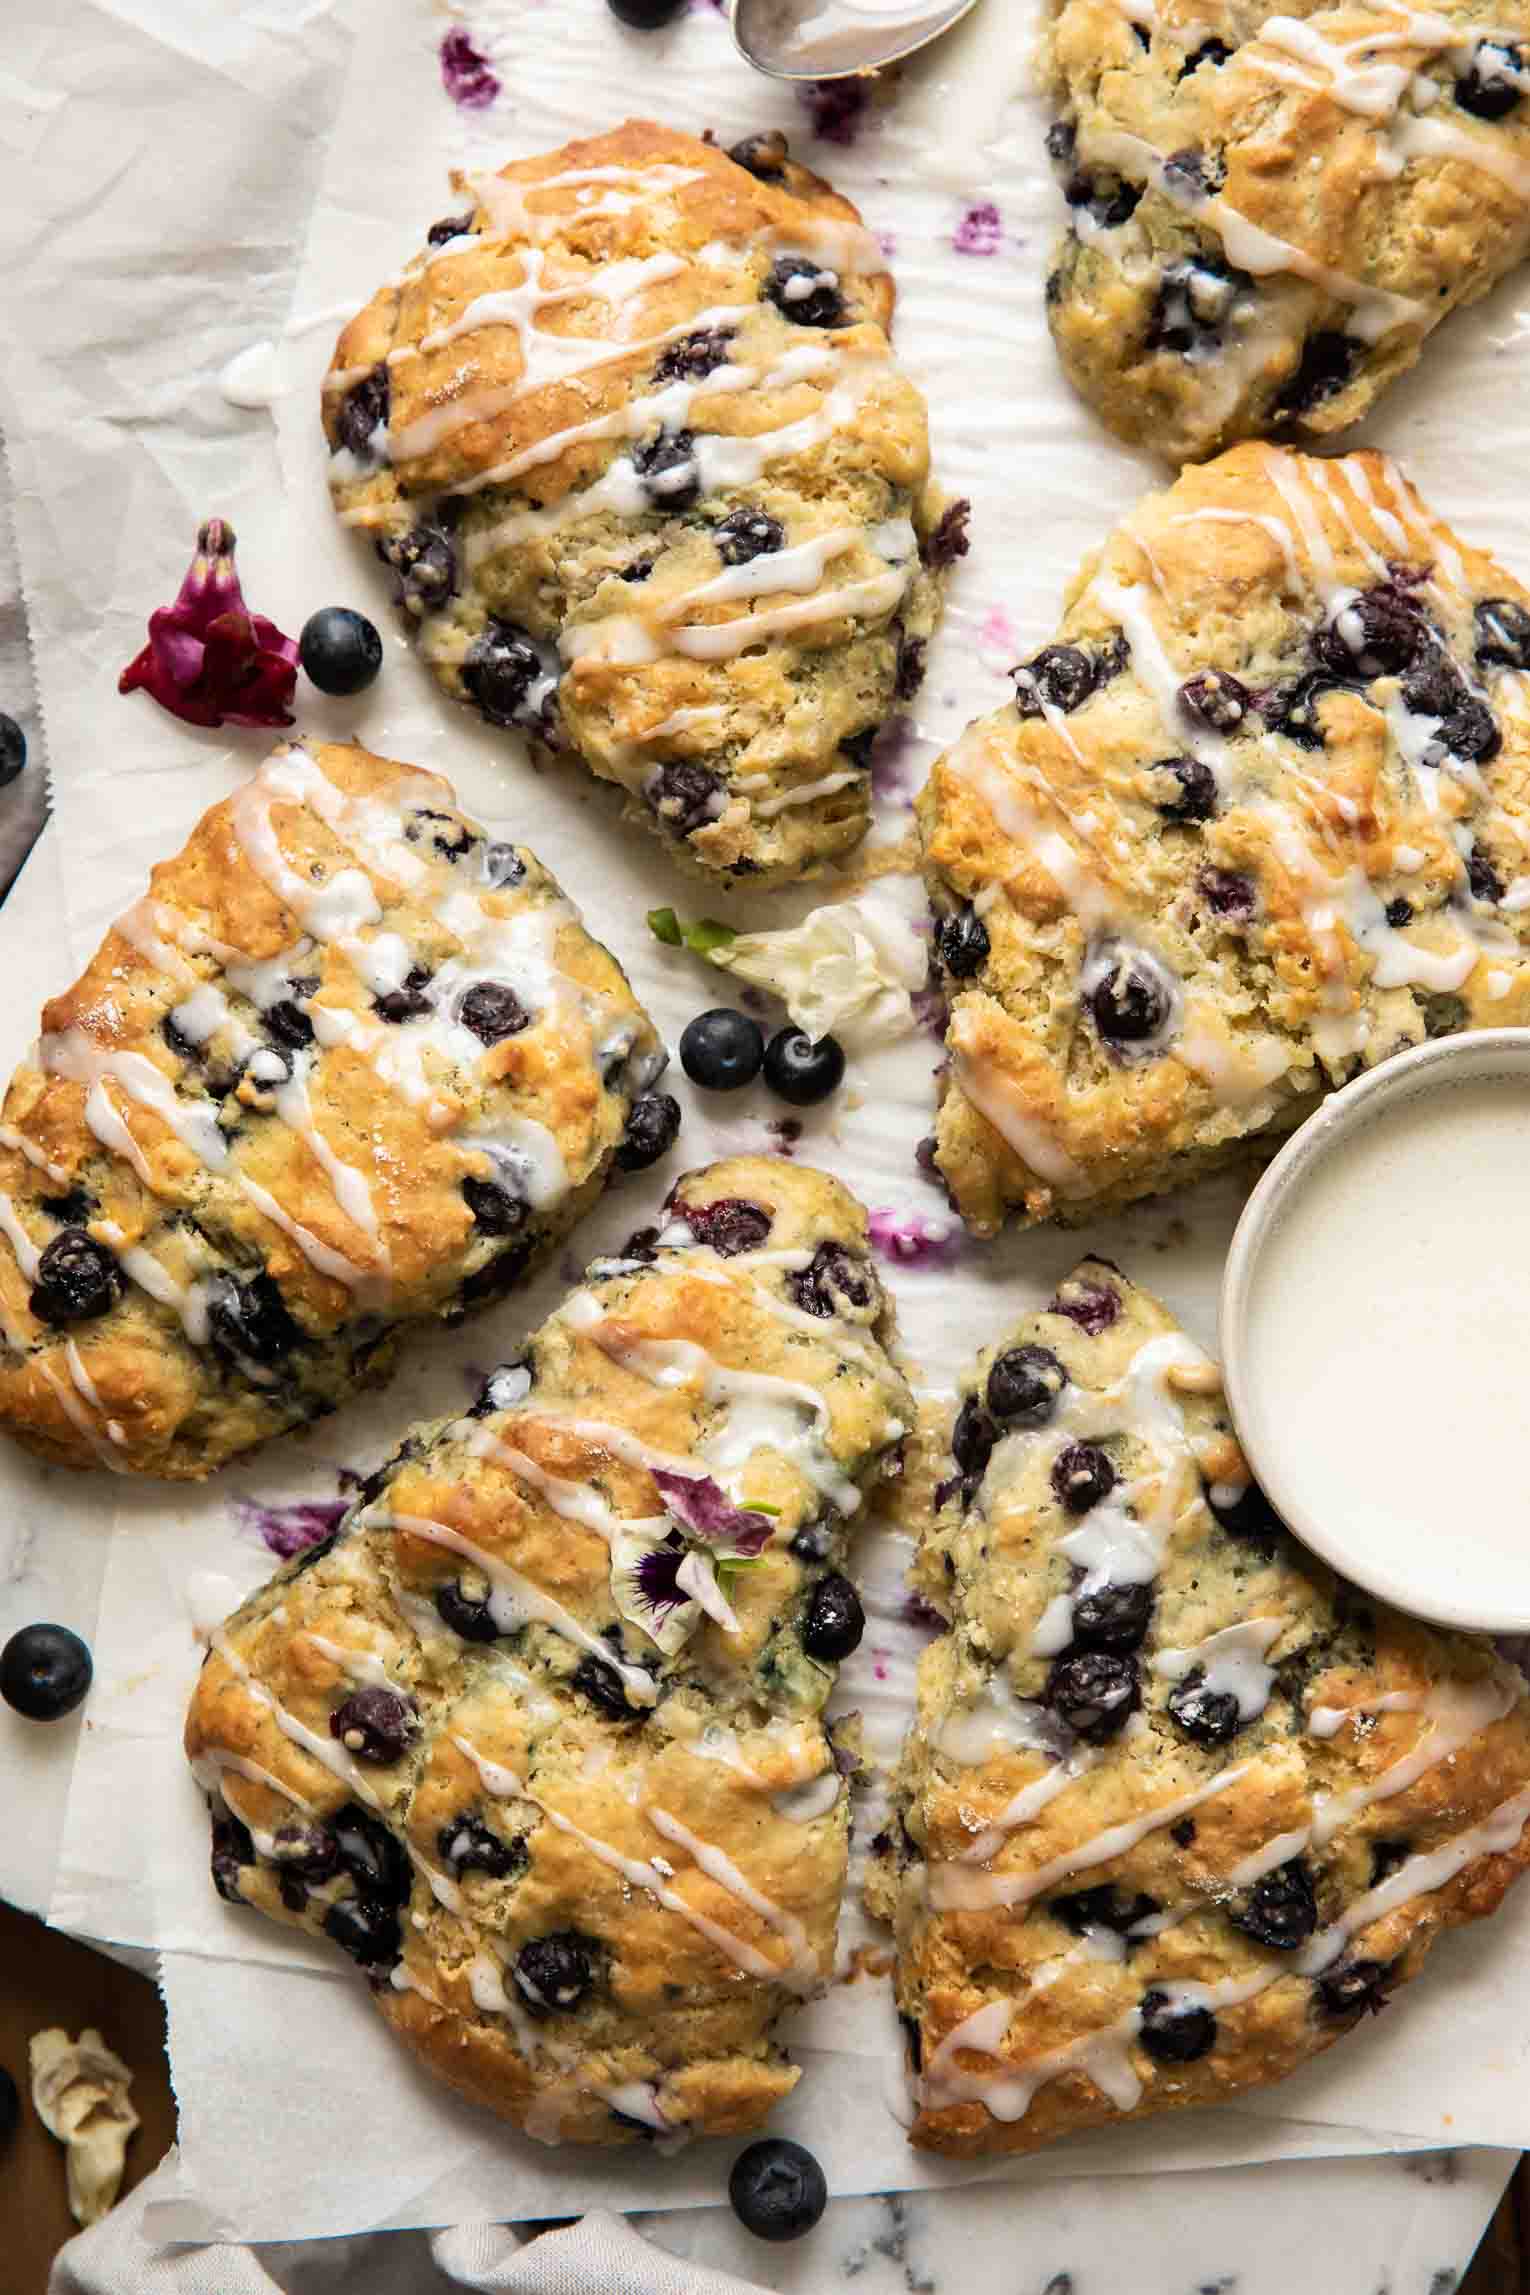 Picture of 5 Maple Blueberry Scones on a baking sheet with parchment paper.